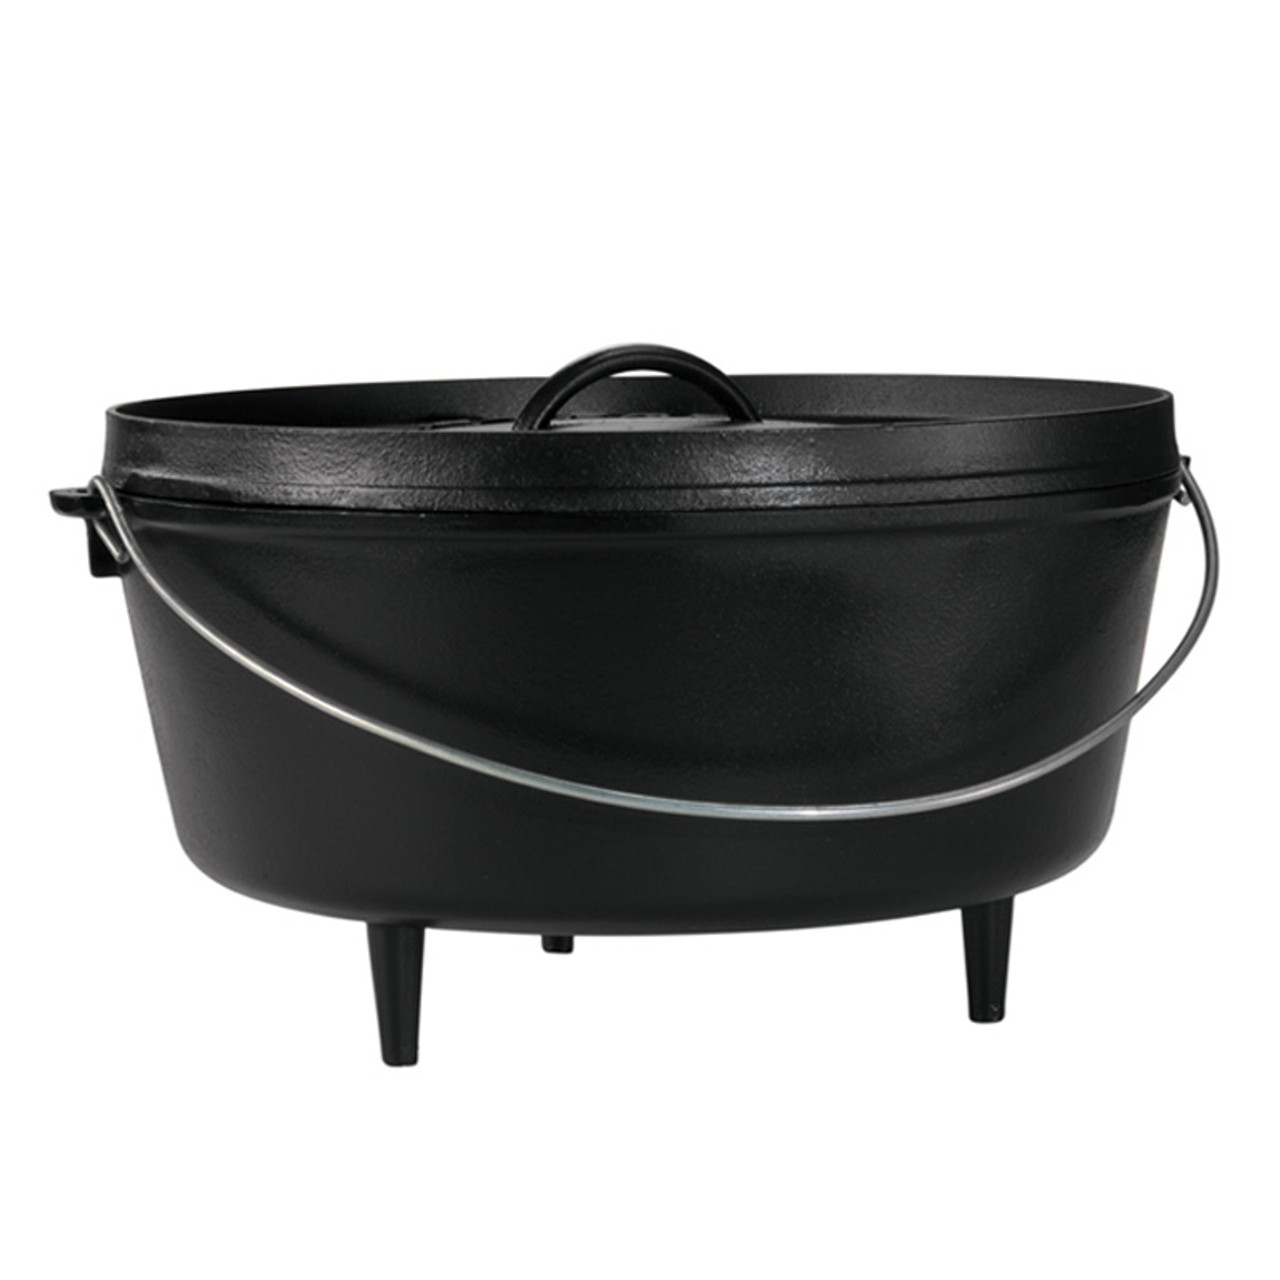 Camp Tripod for Dutch Oven - 2 Pack